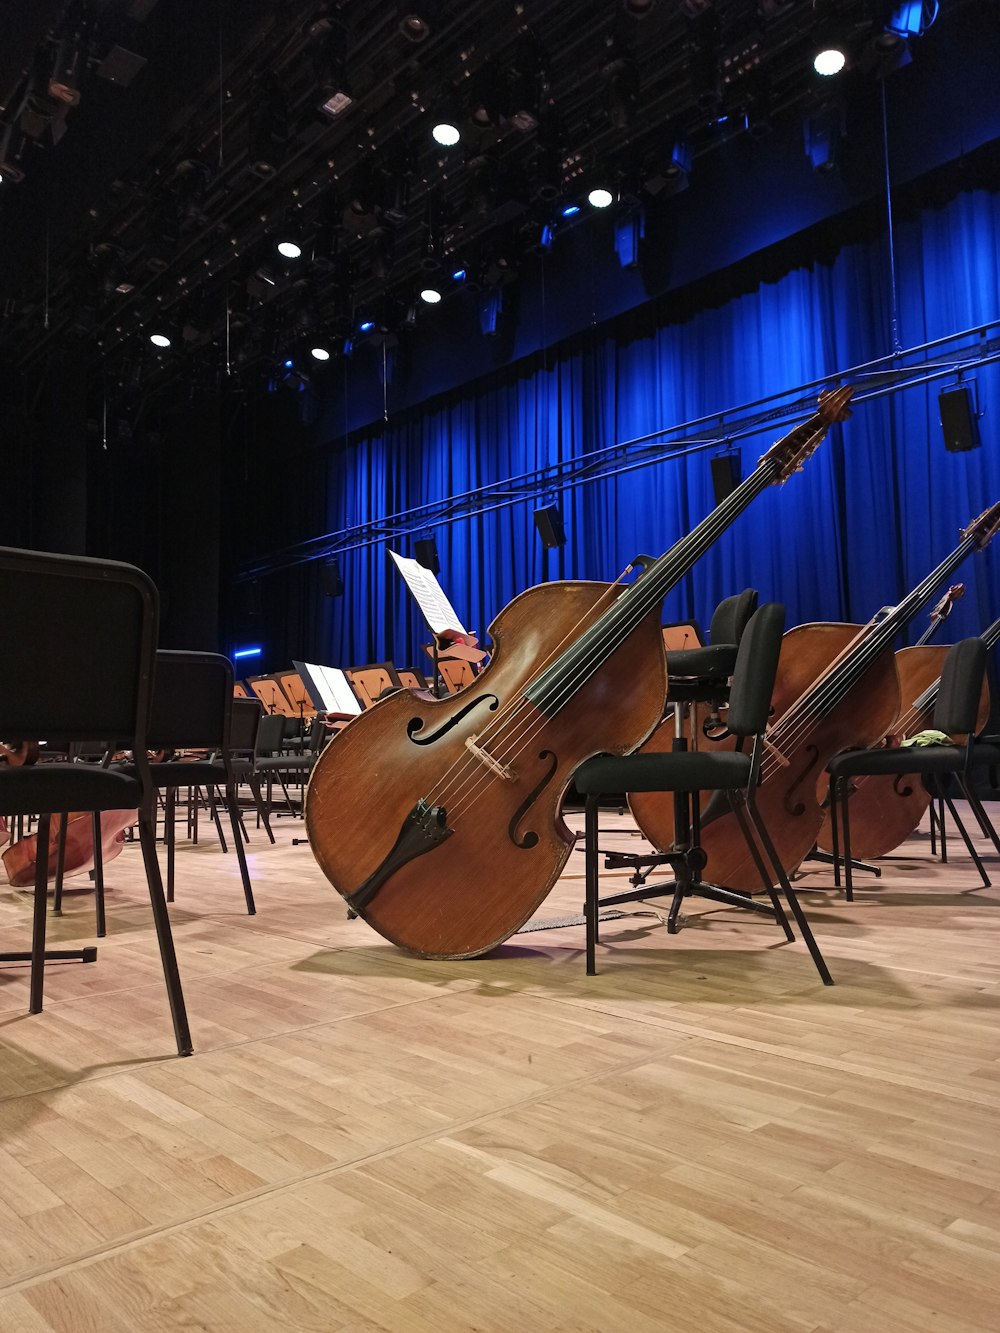 cellos resting on chairs inside building